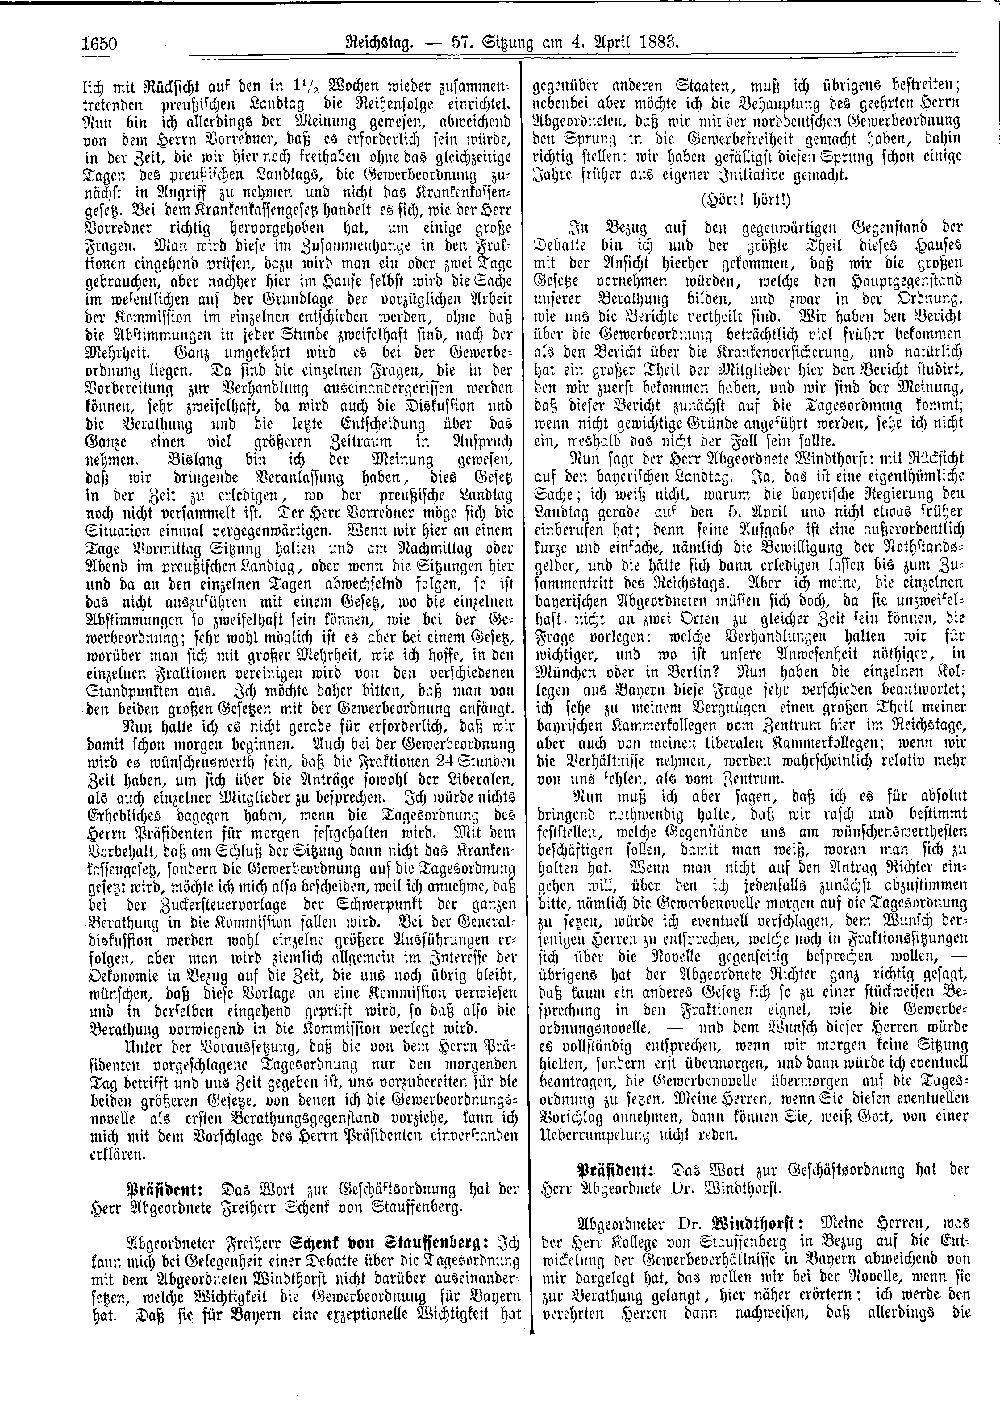 Scan of page 1650